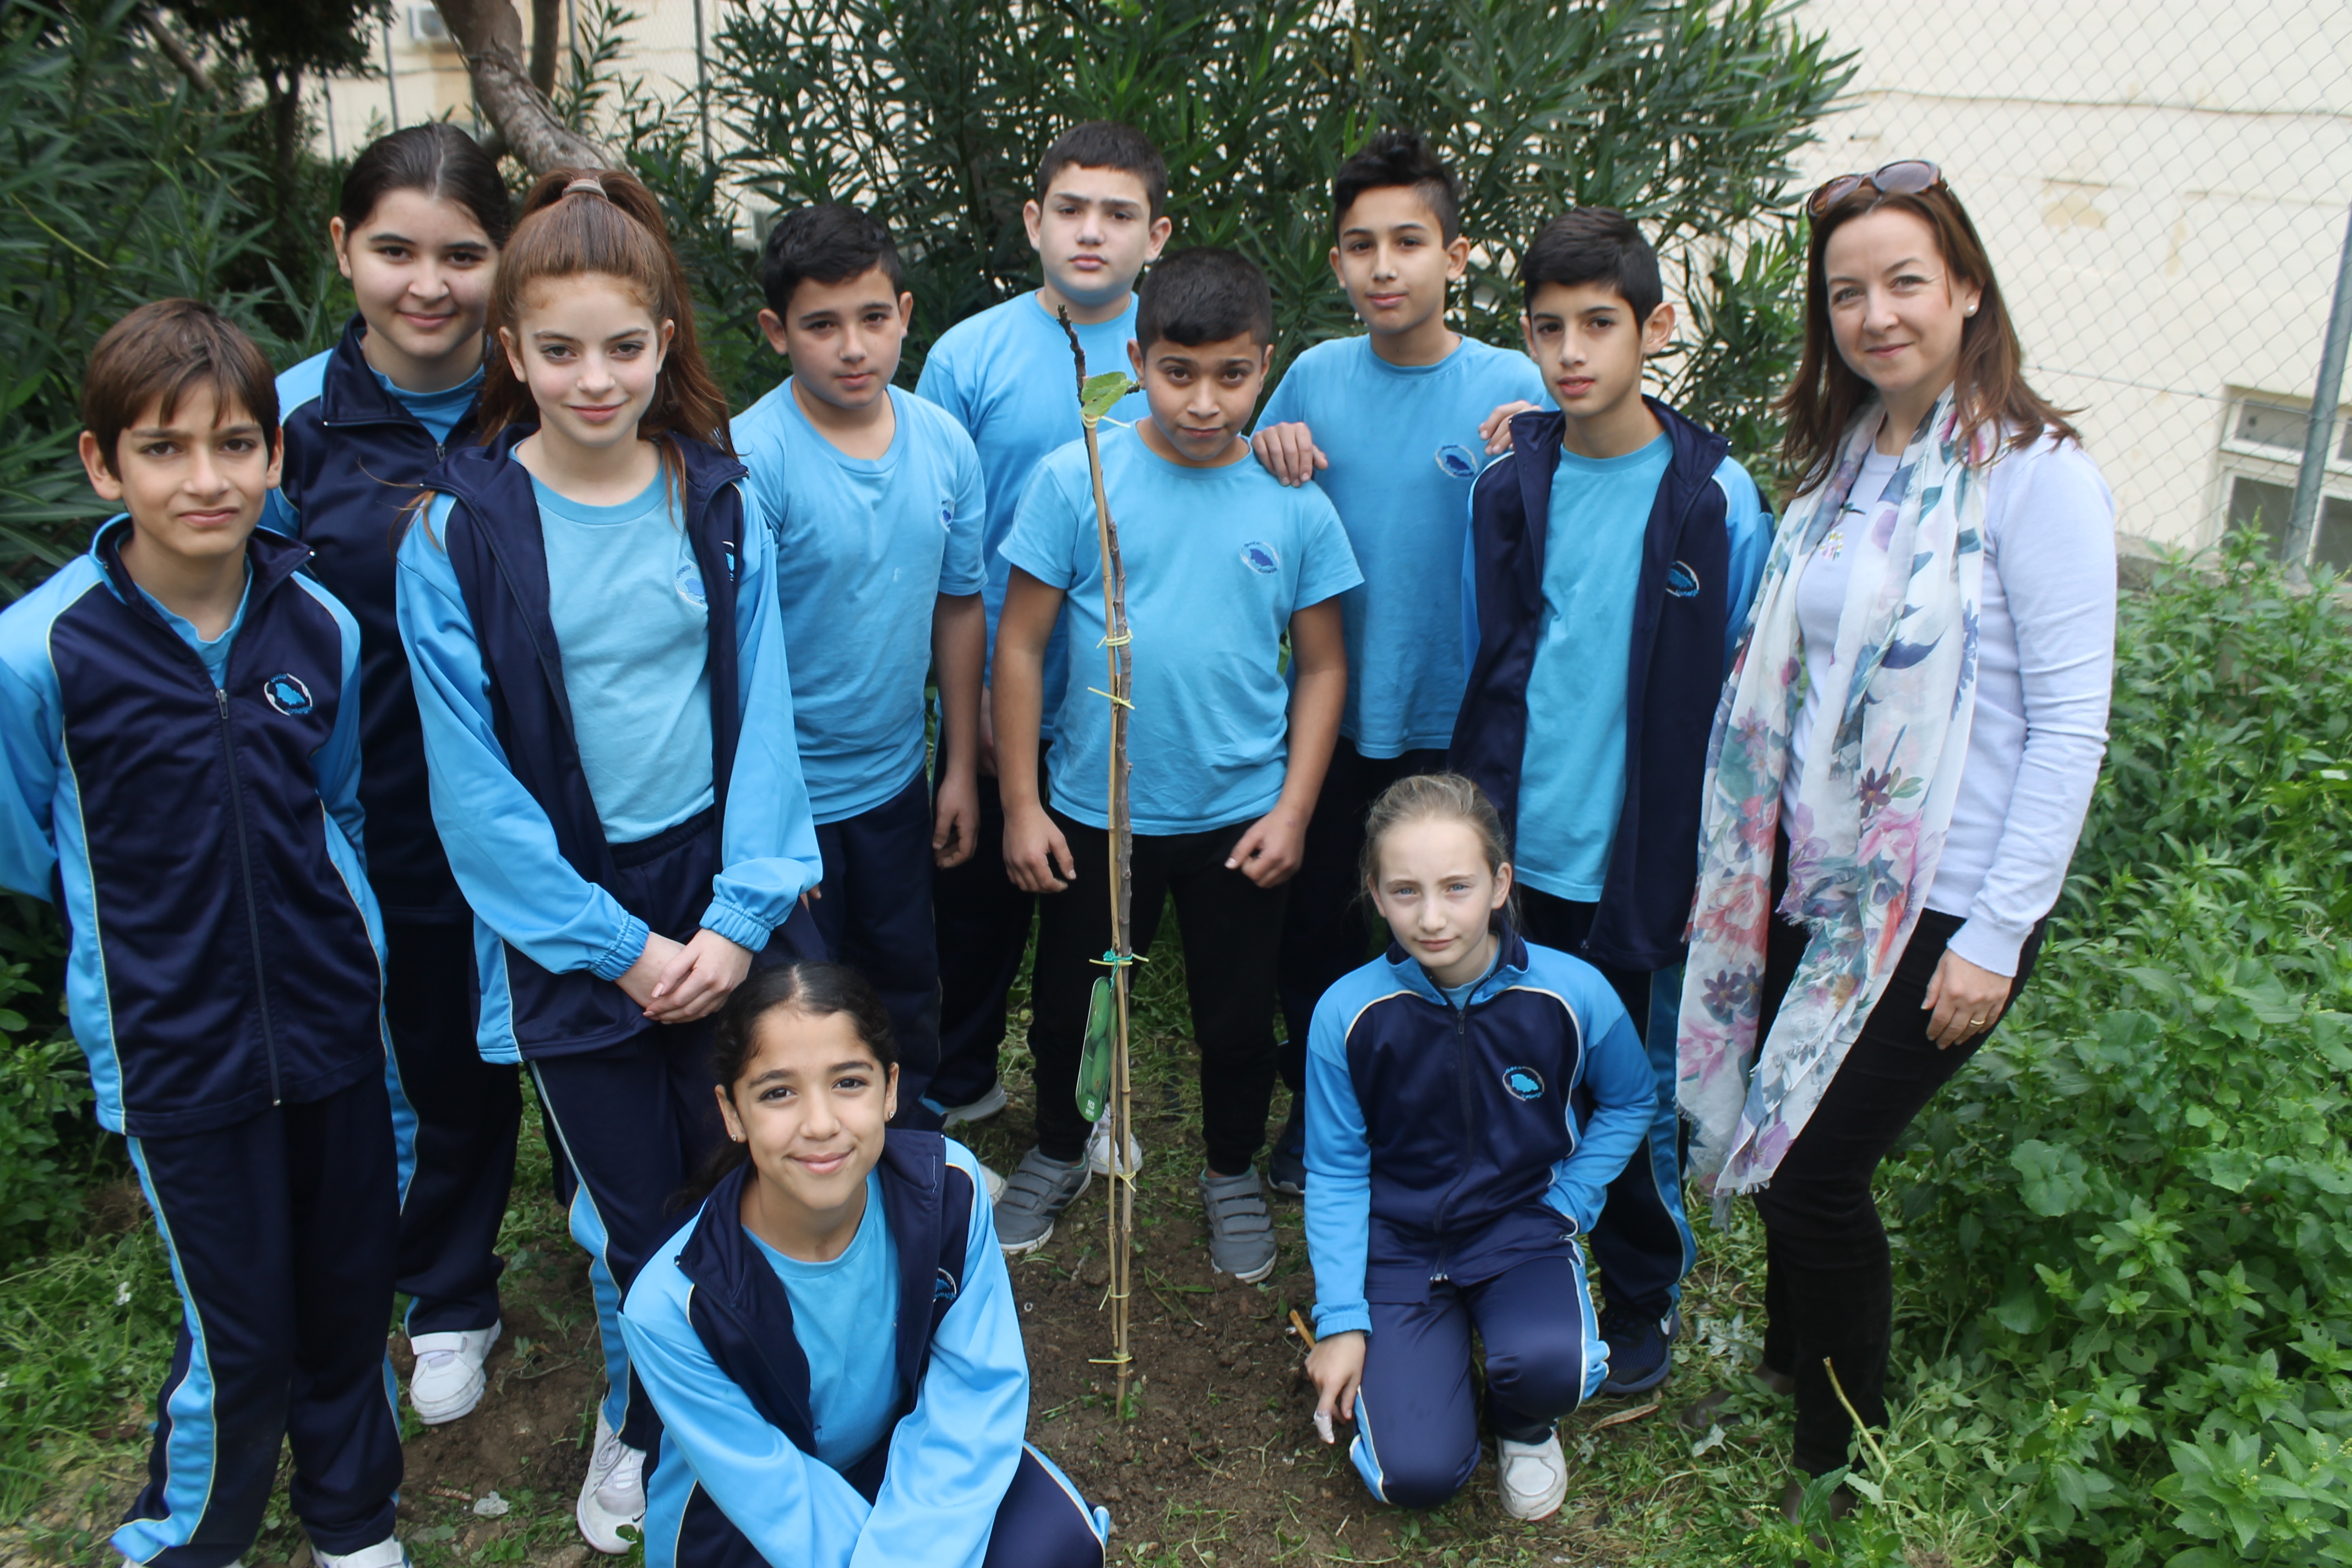  Students from Gozo College Middle School (Victoria, Gozo, Malta), together with their teacher, Ms. Ramona Mercieca, with the newly planted Fig Tree in the school garden.